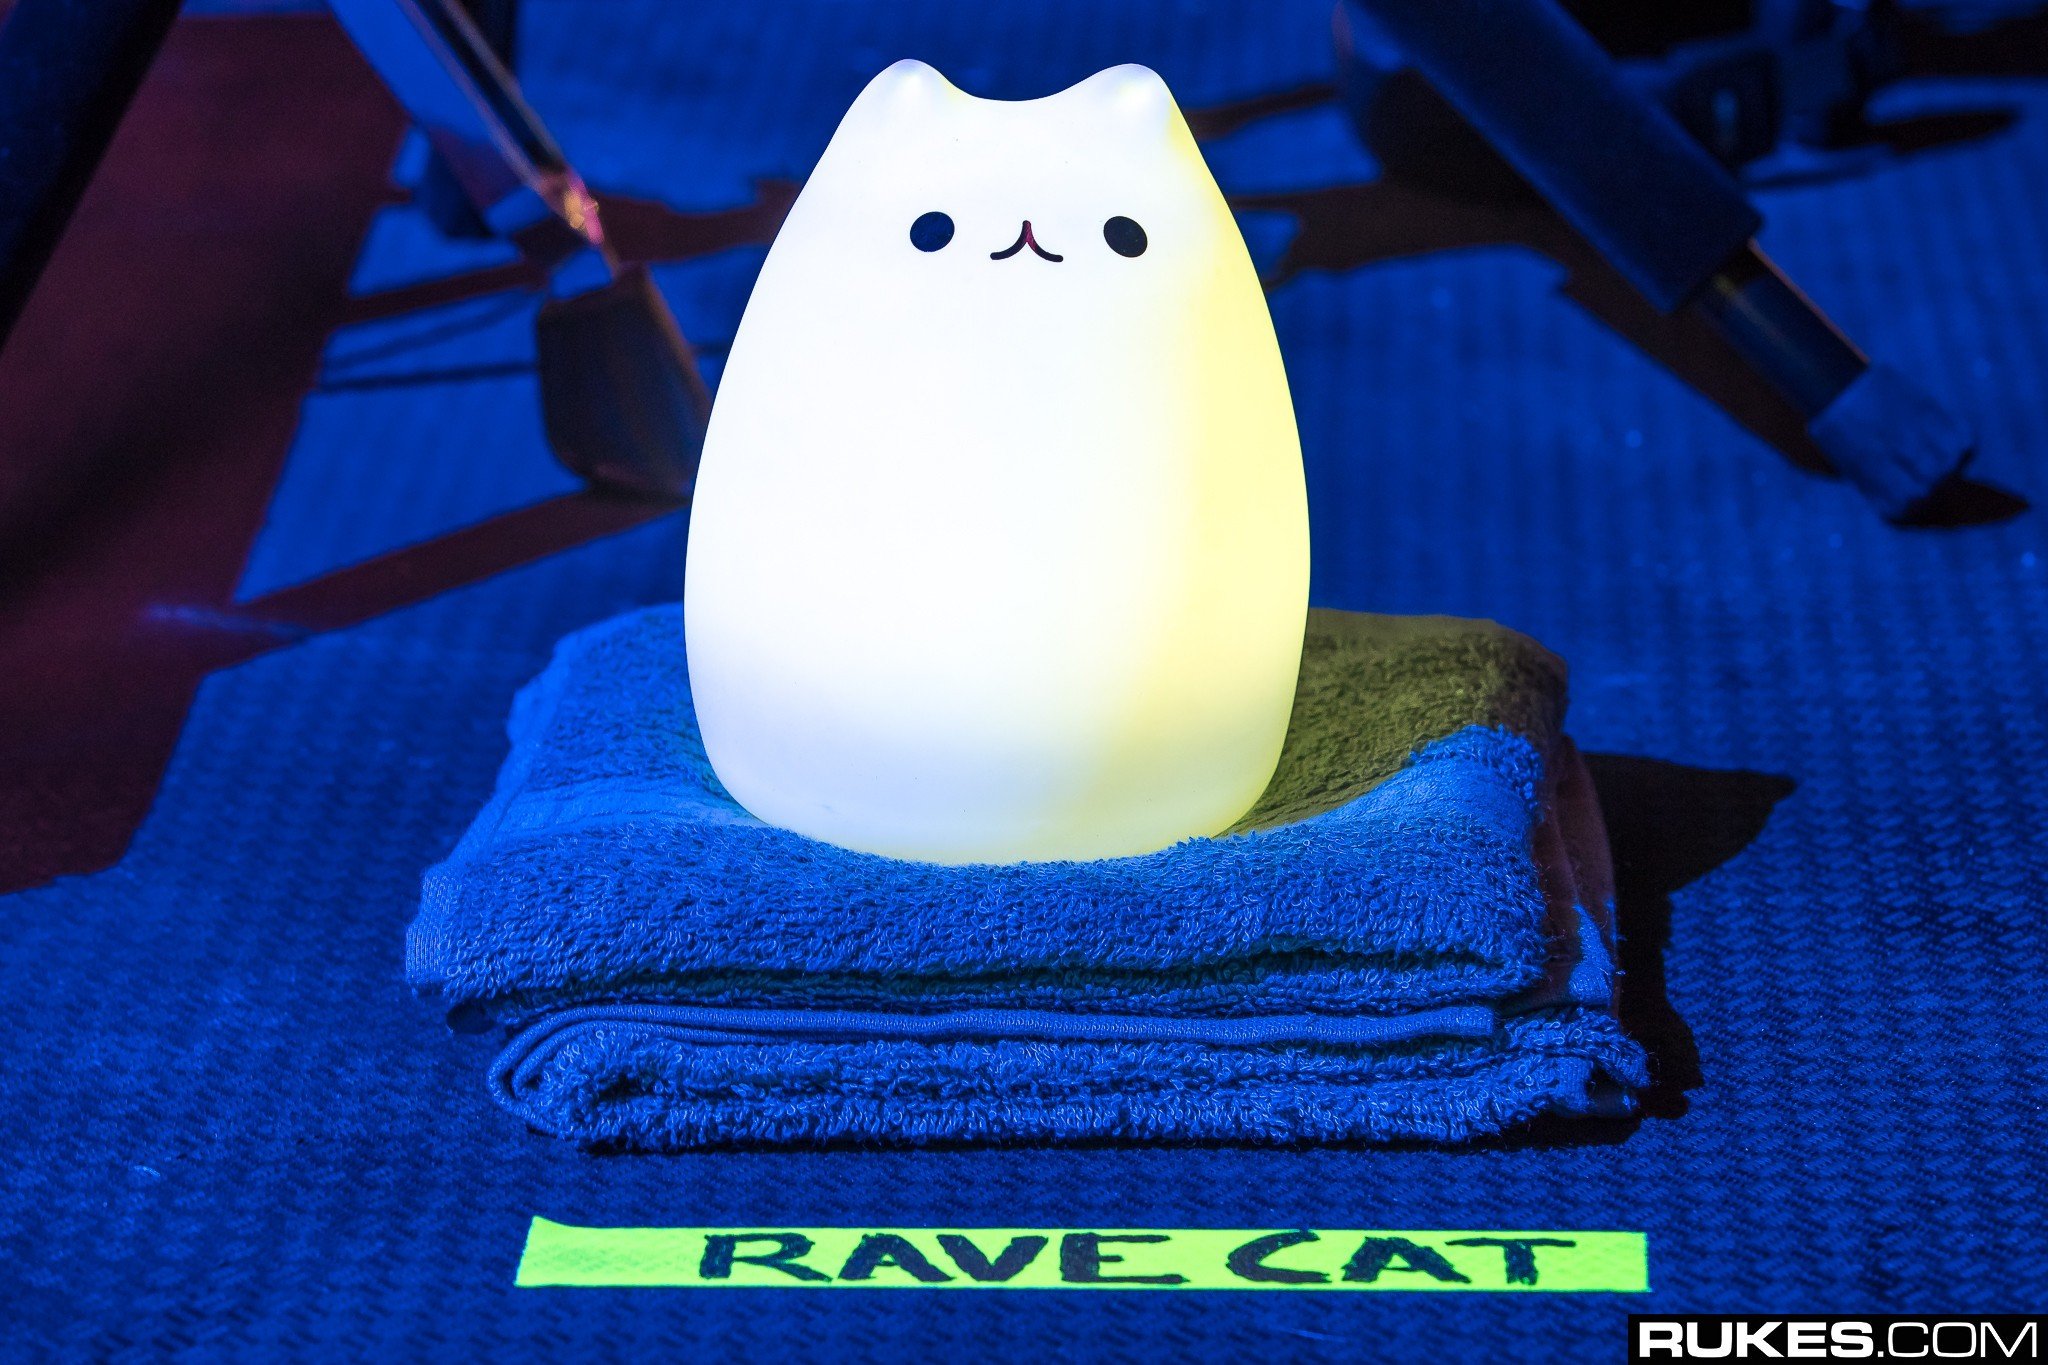 photography, Rukes.com, Rave, Cat, Toy Wallpaper